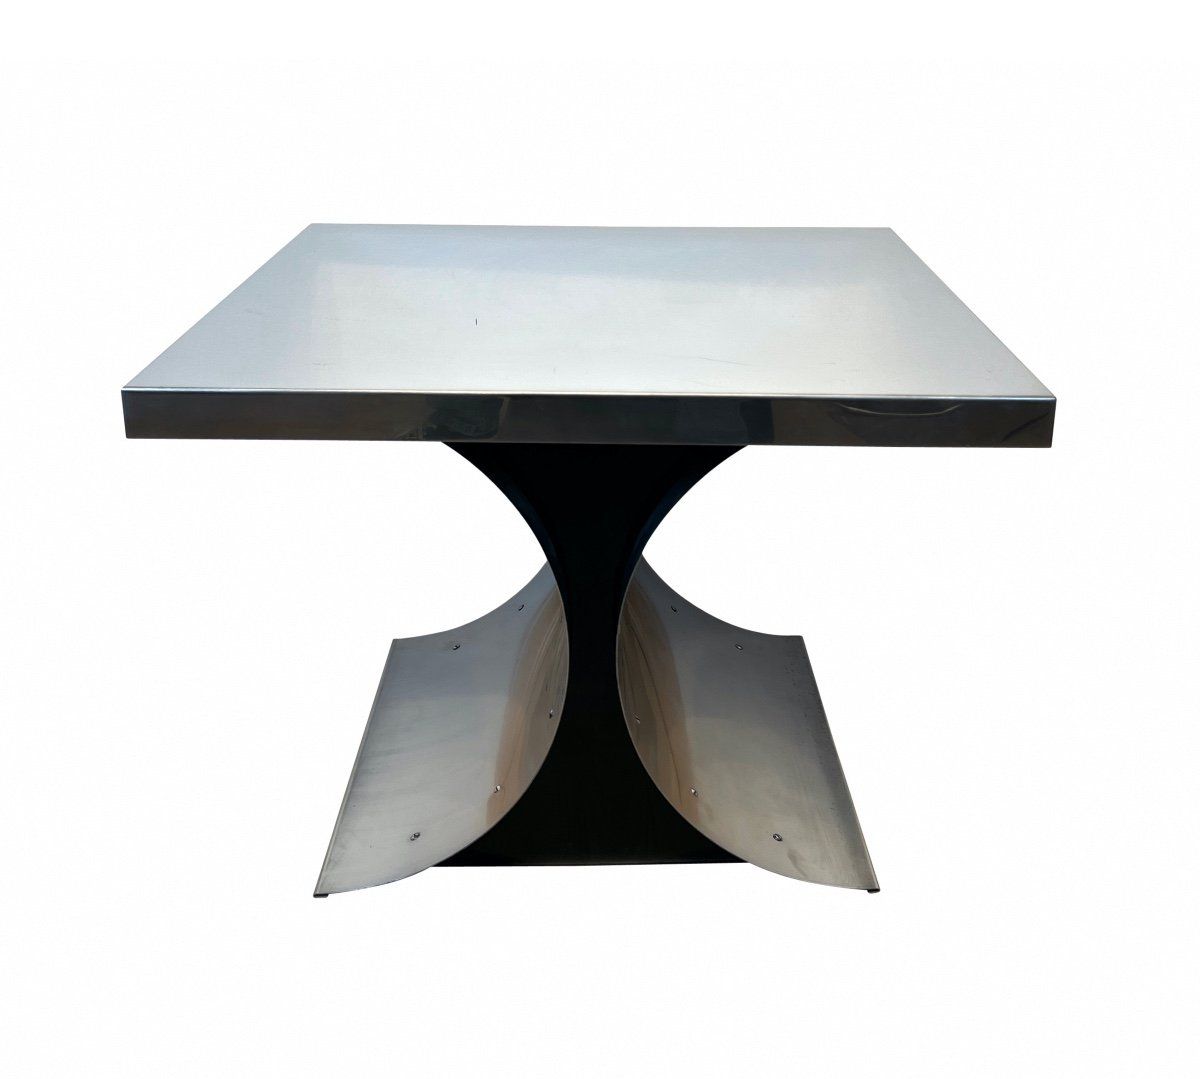 Curved Side Table, Brushed Metal, Lacquer, France Circa 1970 – Low Table Regarding Brushed Stainless Steel Coffee Tables (View 9 of 20)